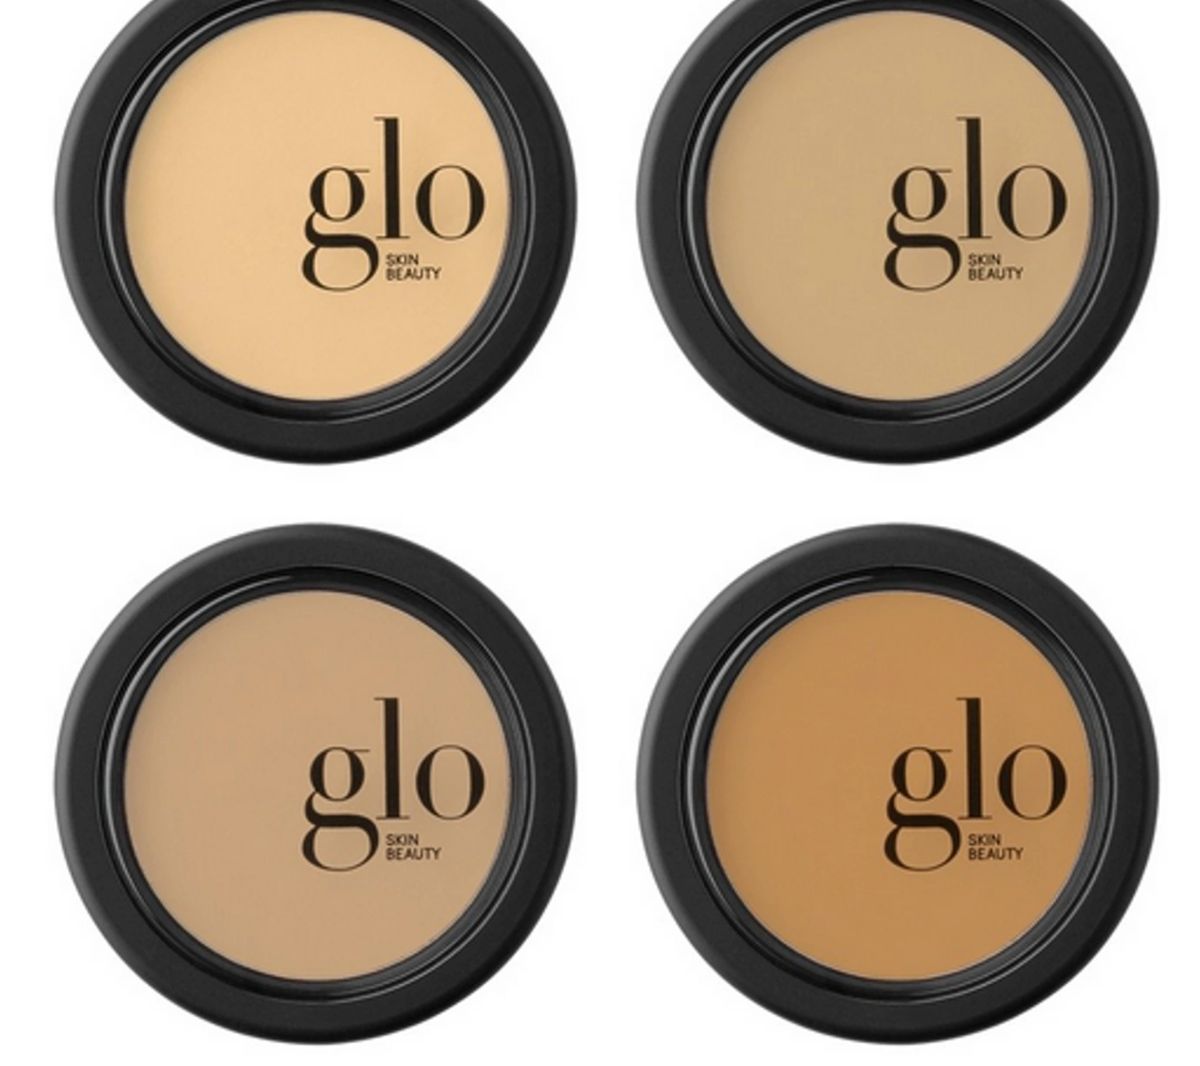 Oil Free Camouflage Concealer Glo Skin Beauty